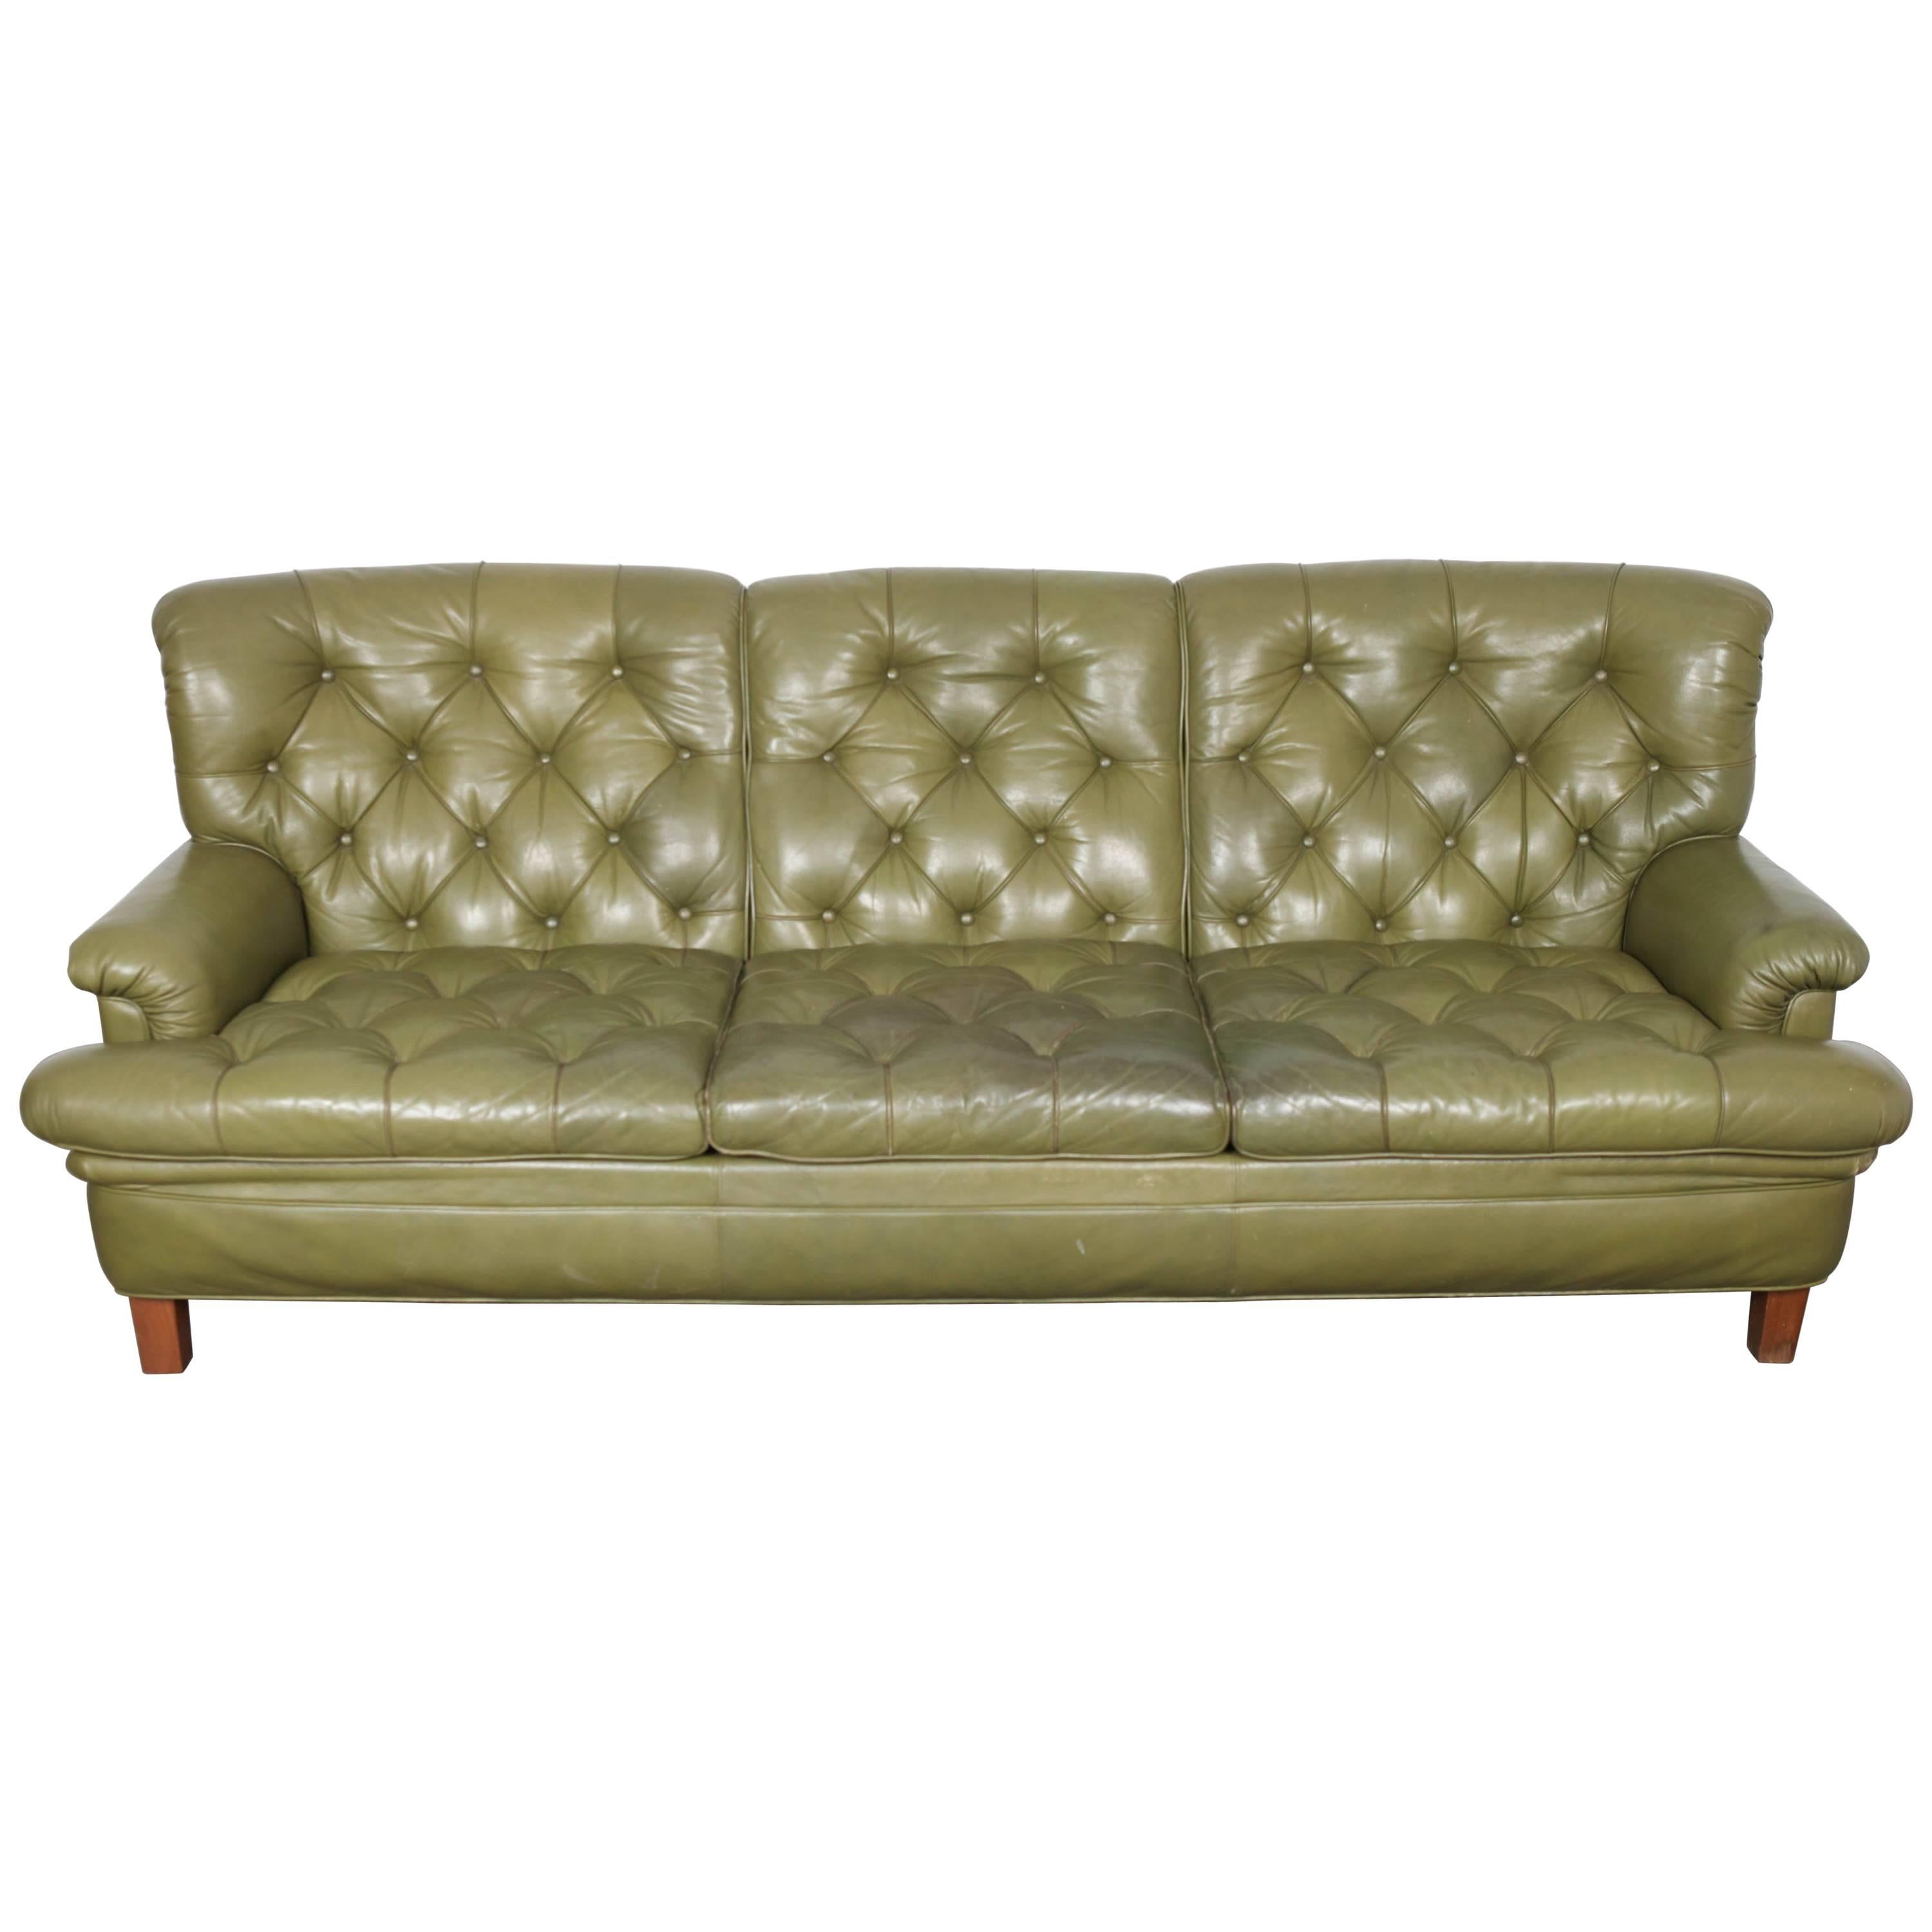 Arne Norell Three-Seat Sofa in Green Leather